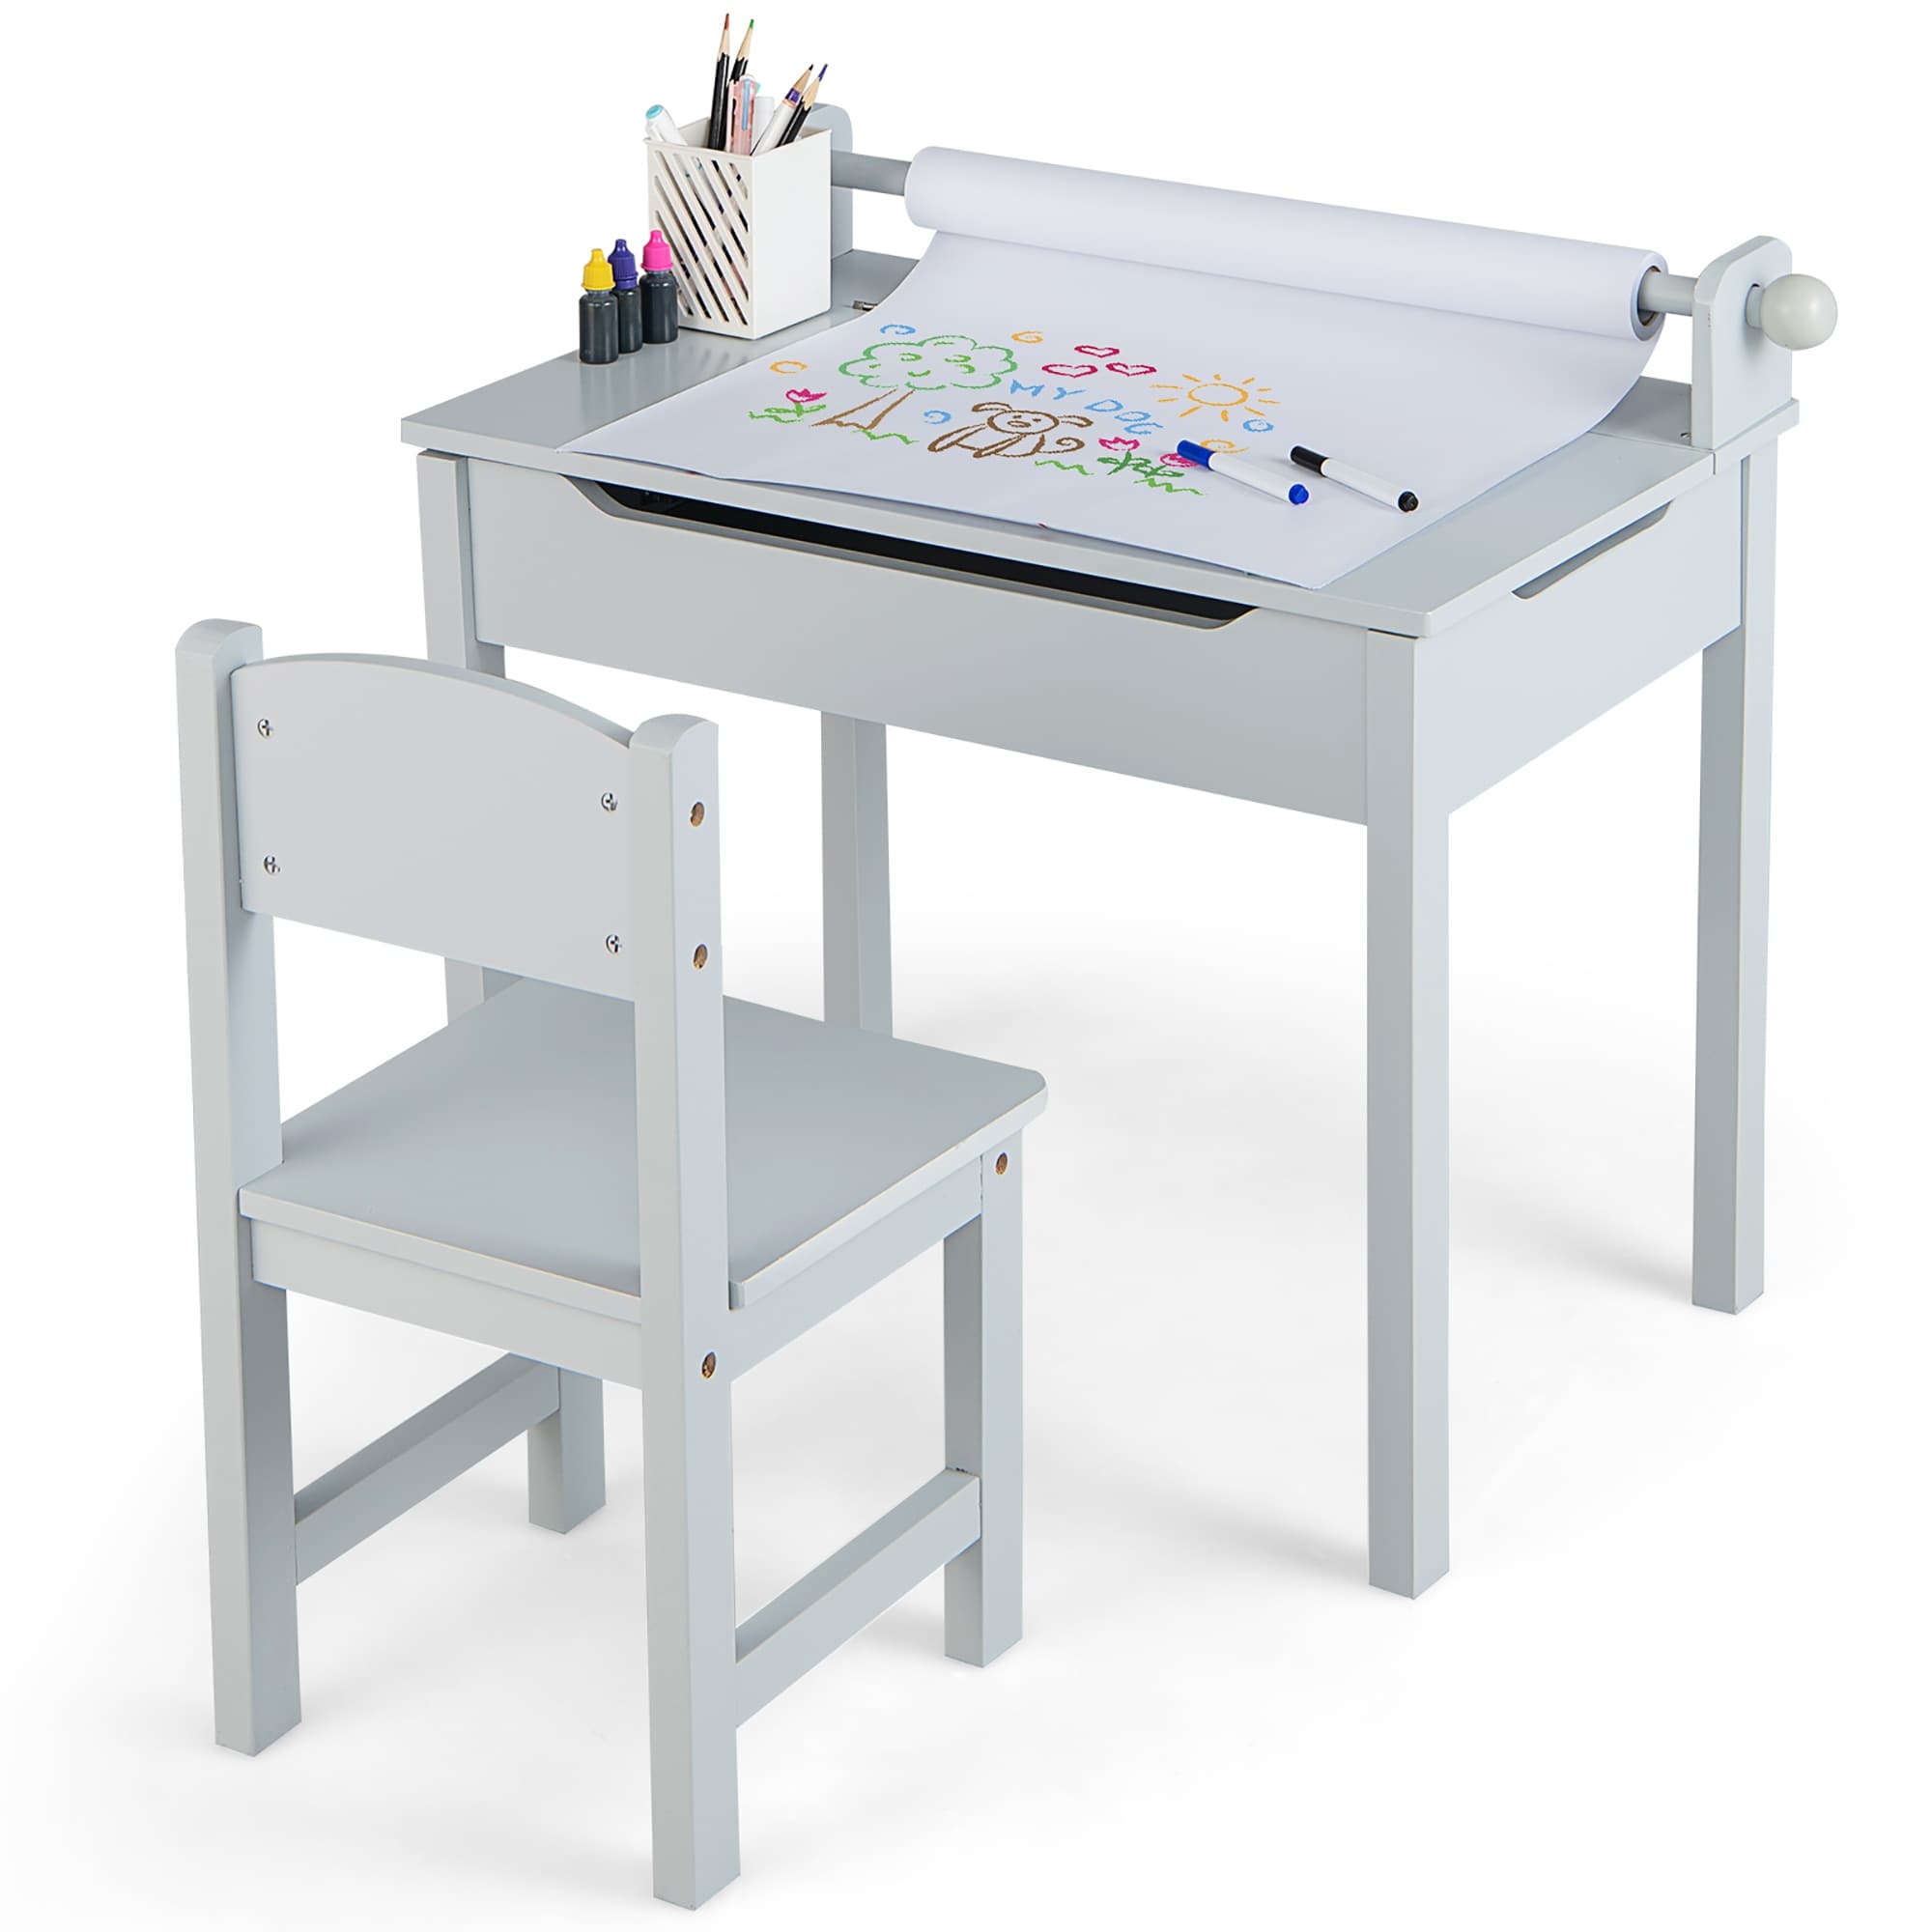 https://ak1.ostkcdn.com/images/products/is/images/direct/cf53804350e224ed3aaf39bf24d3ba962602e281/Costway-Toddler-Craft-Table-%26-Chair-Set-Kids-Art-Crafts-Table.jpg